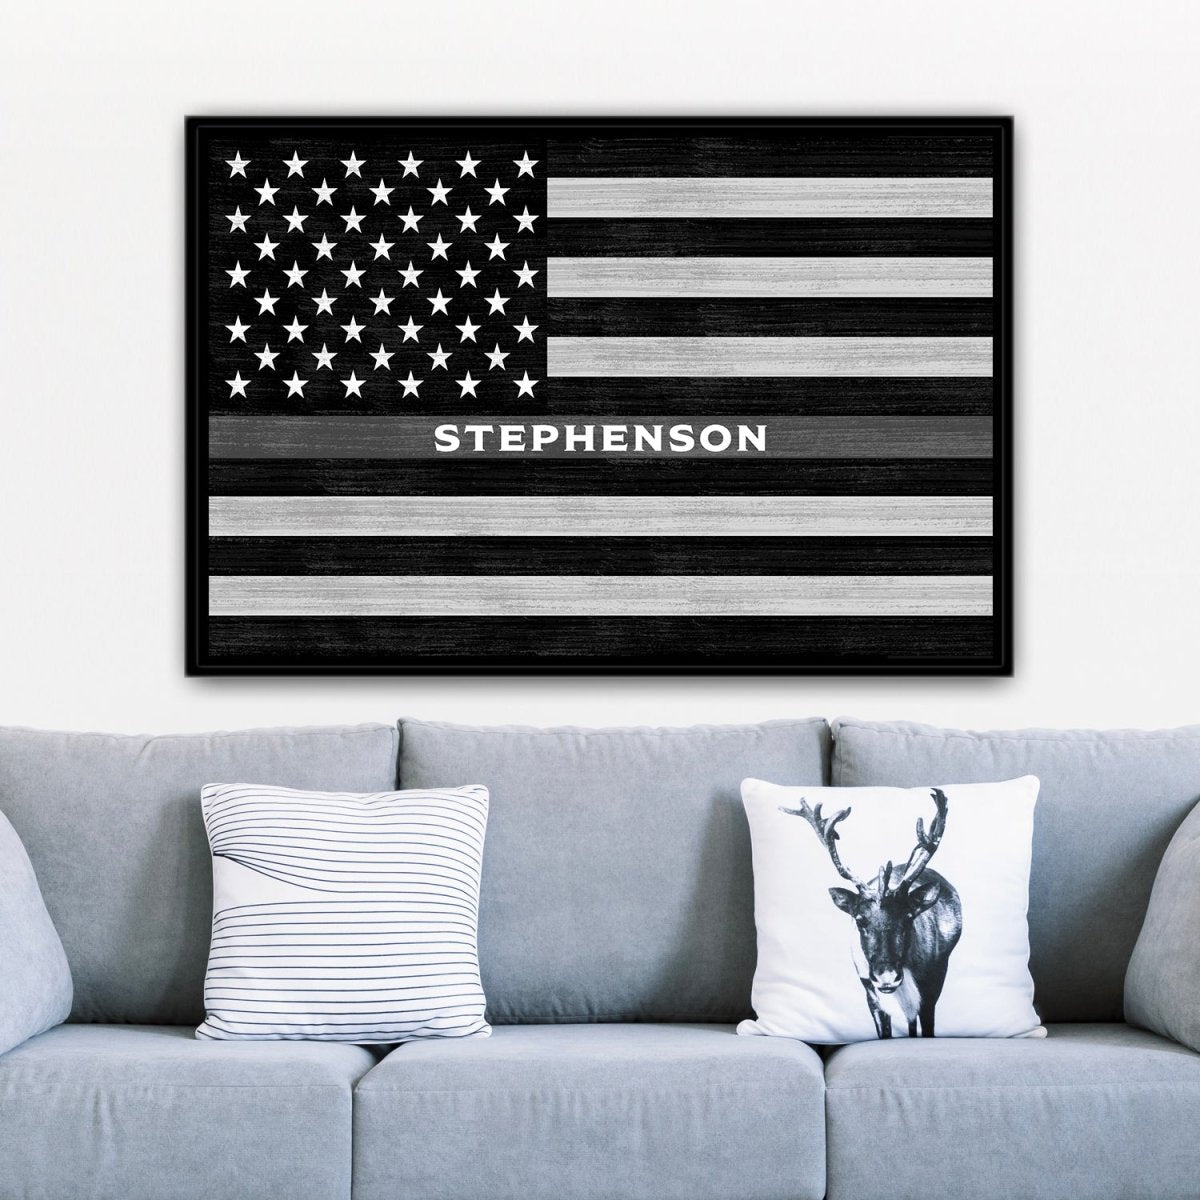 Correctional Officer Sign Personalized With Name Above Couch - Pretty Perfect Studio